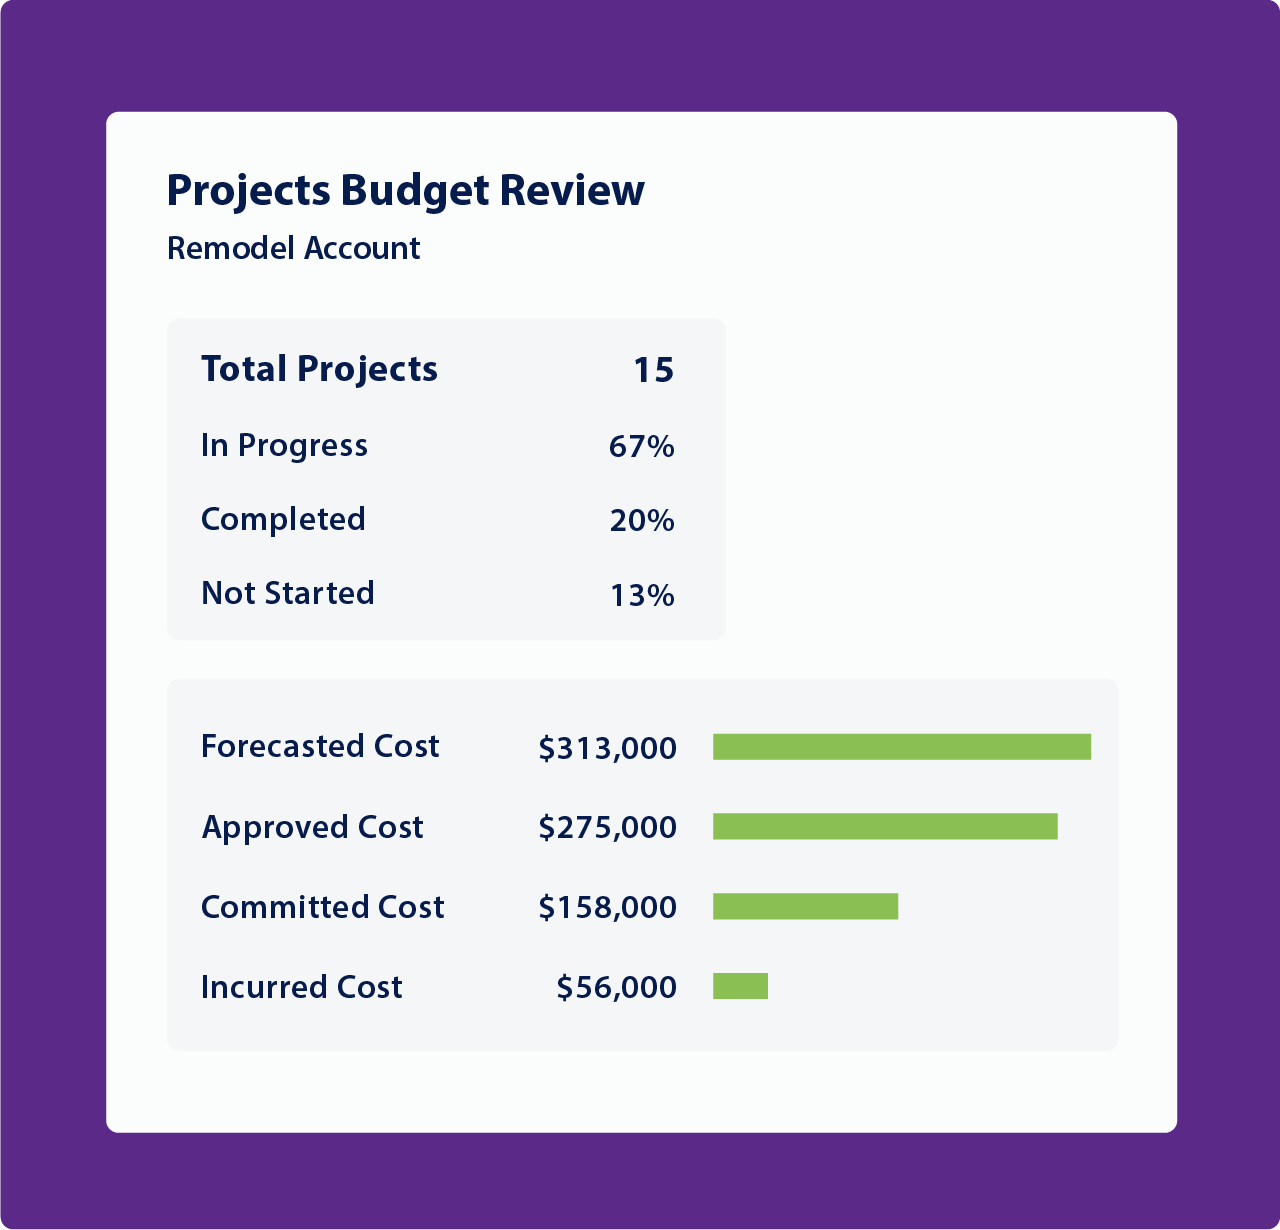 Projects Budget Review panel within servicechannel platform